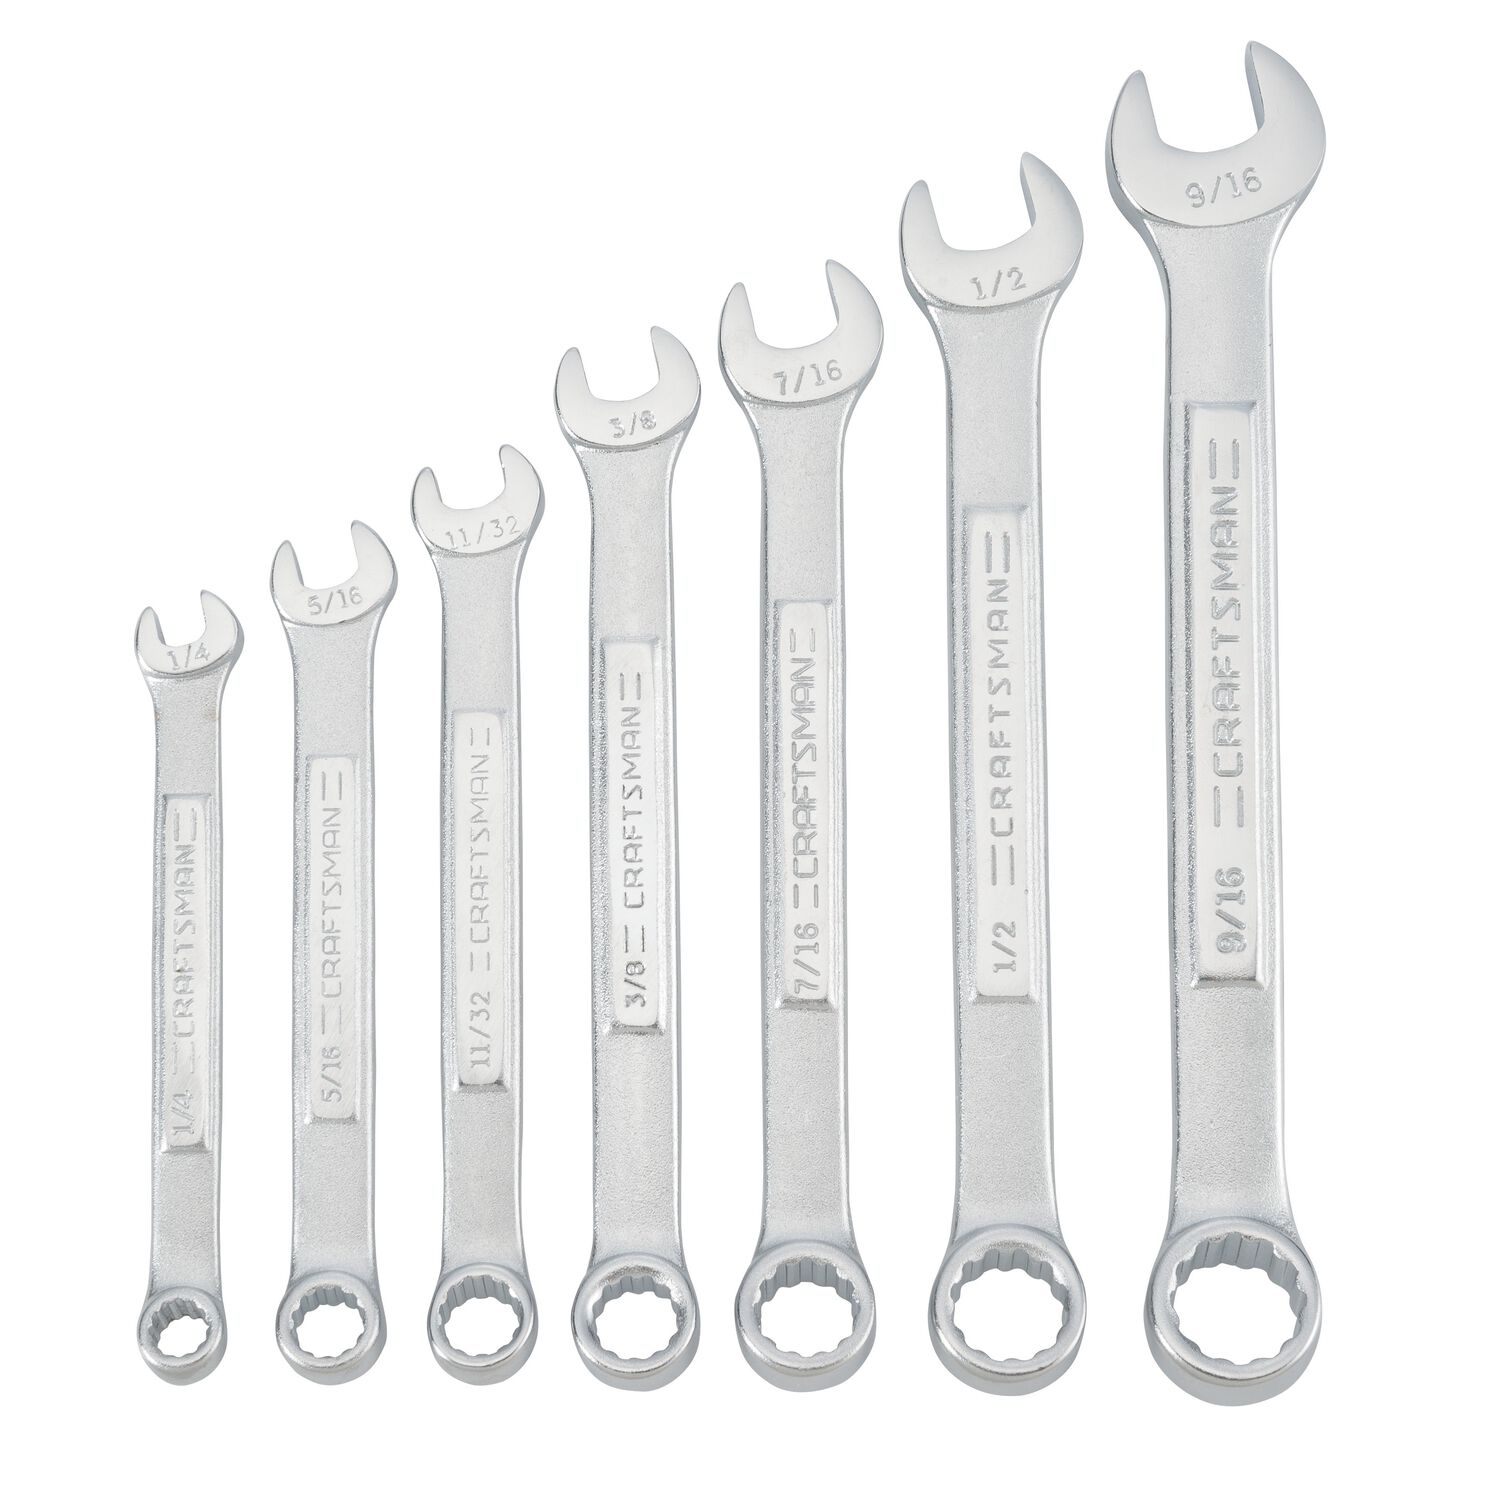 Wrenches | Stine Home + Yard : The Family You Can Build Around™